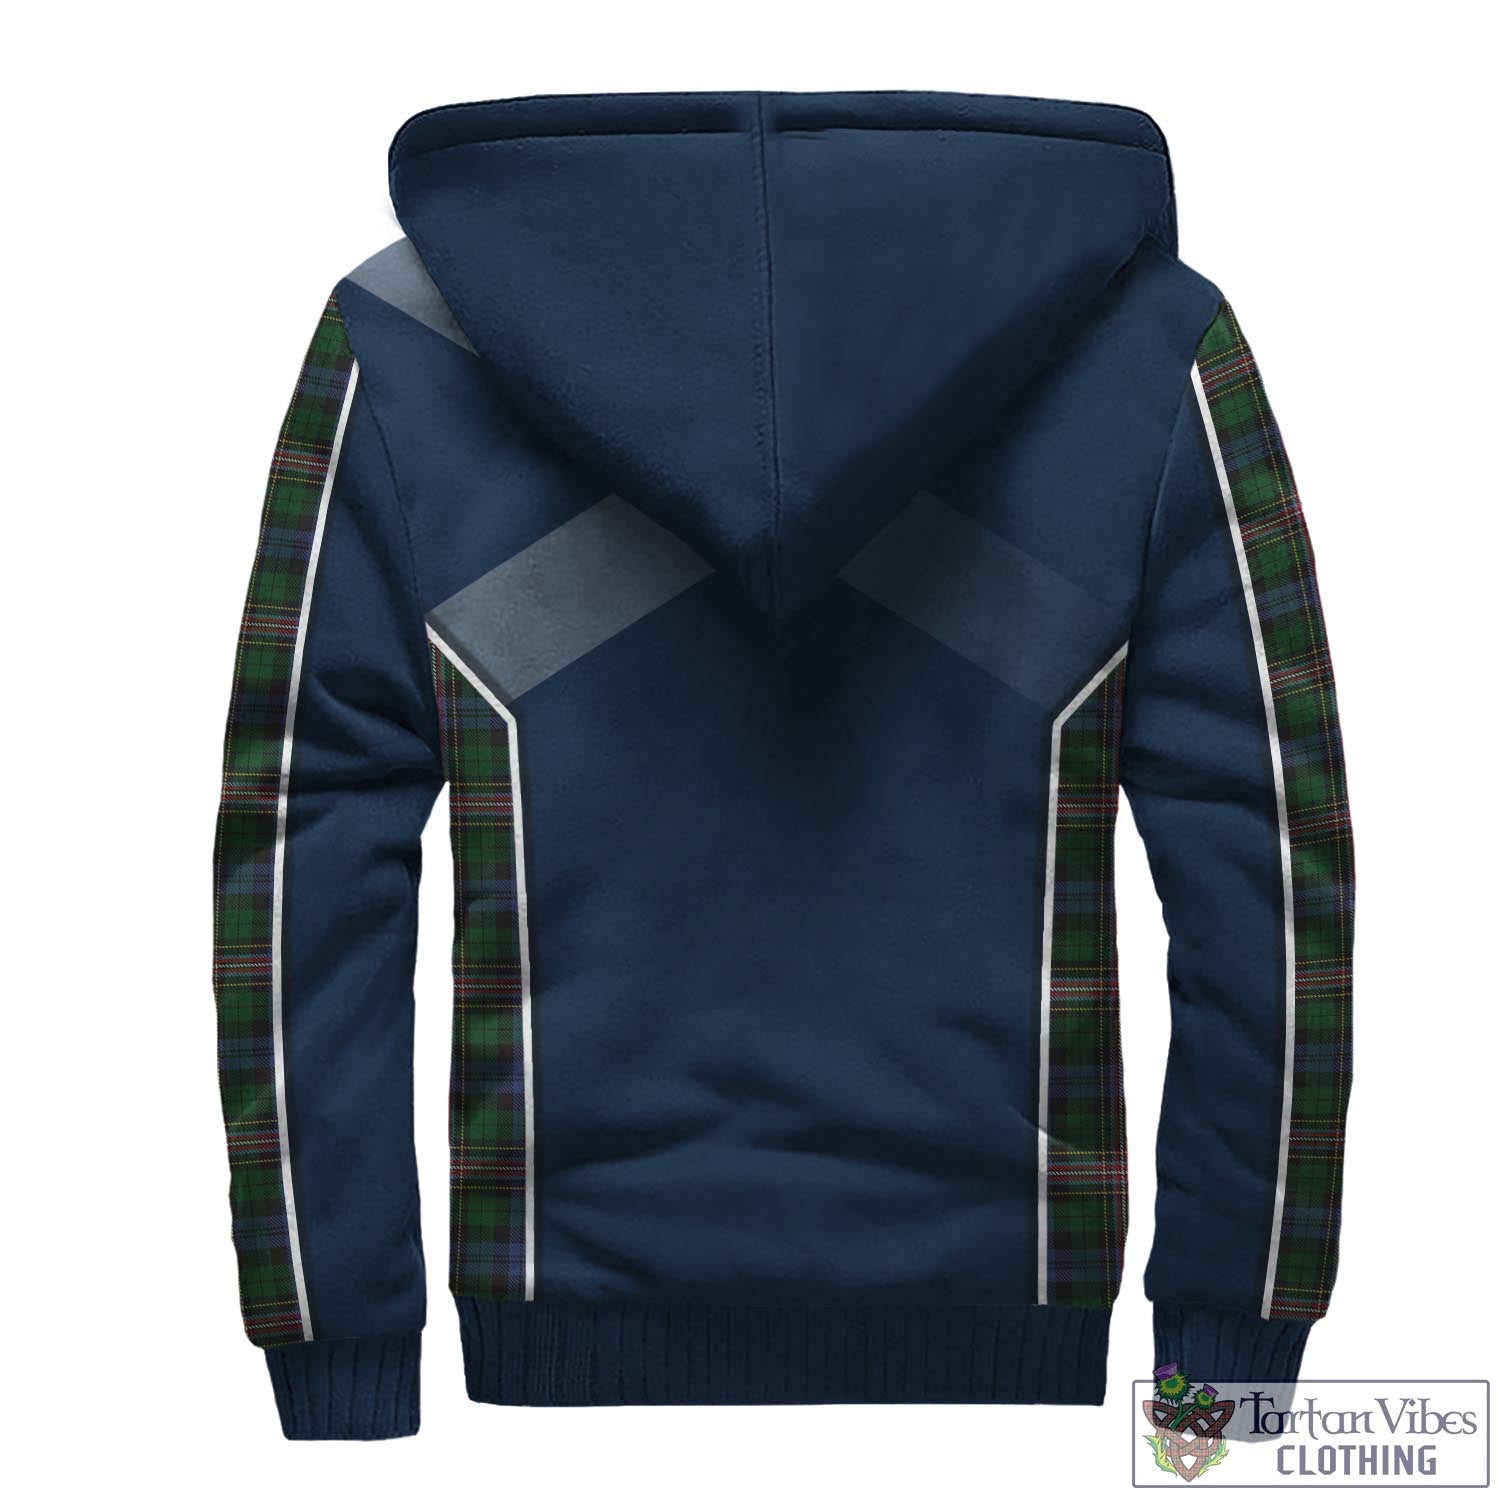 Tartan Vibes Clothing Allison Tartan Sherpa Hoodie with Family Crest and Scottish Thistle Vibes Sport Style